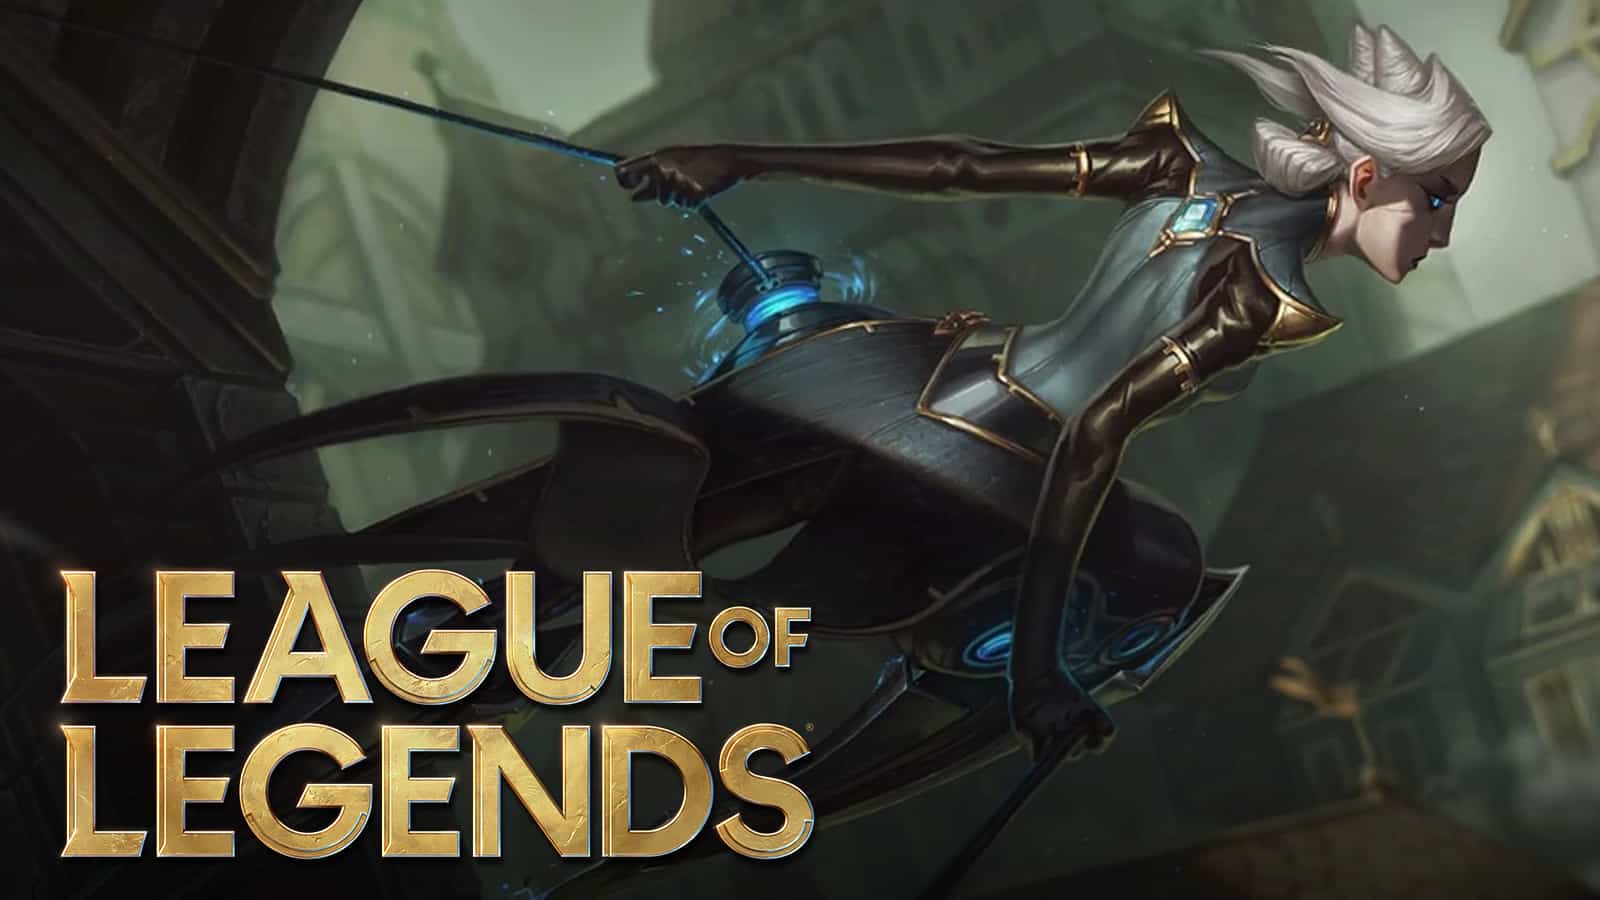 Camille from League of Legends